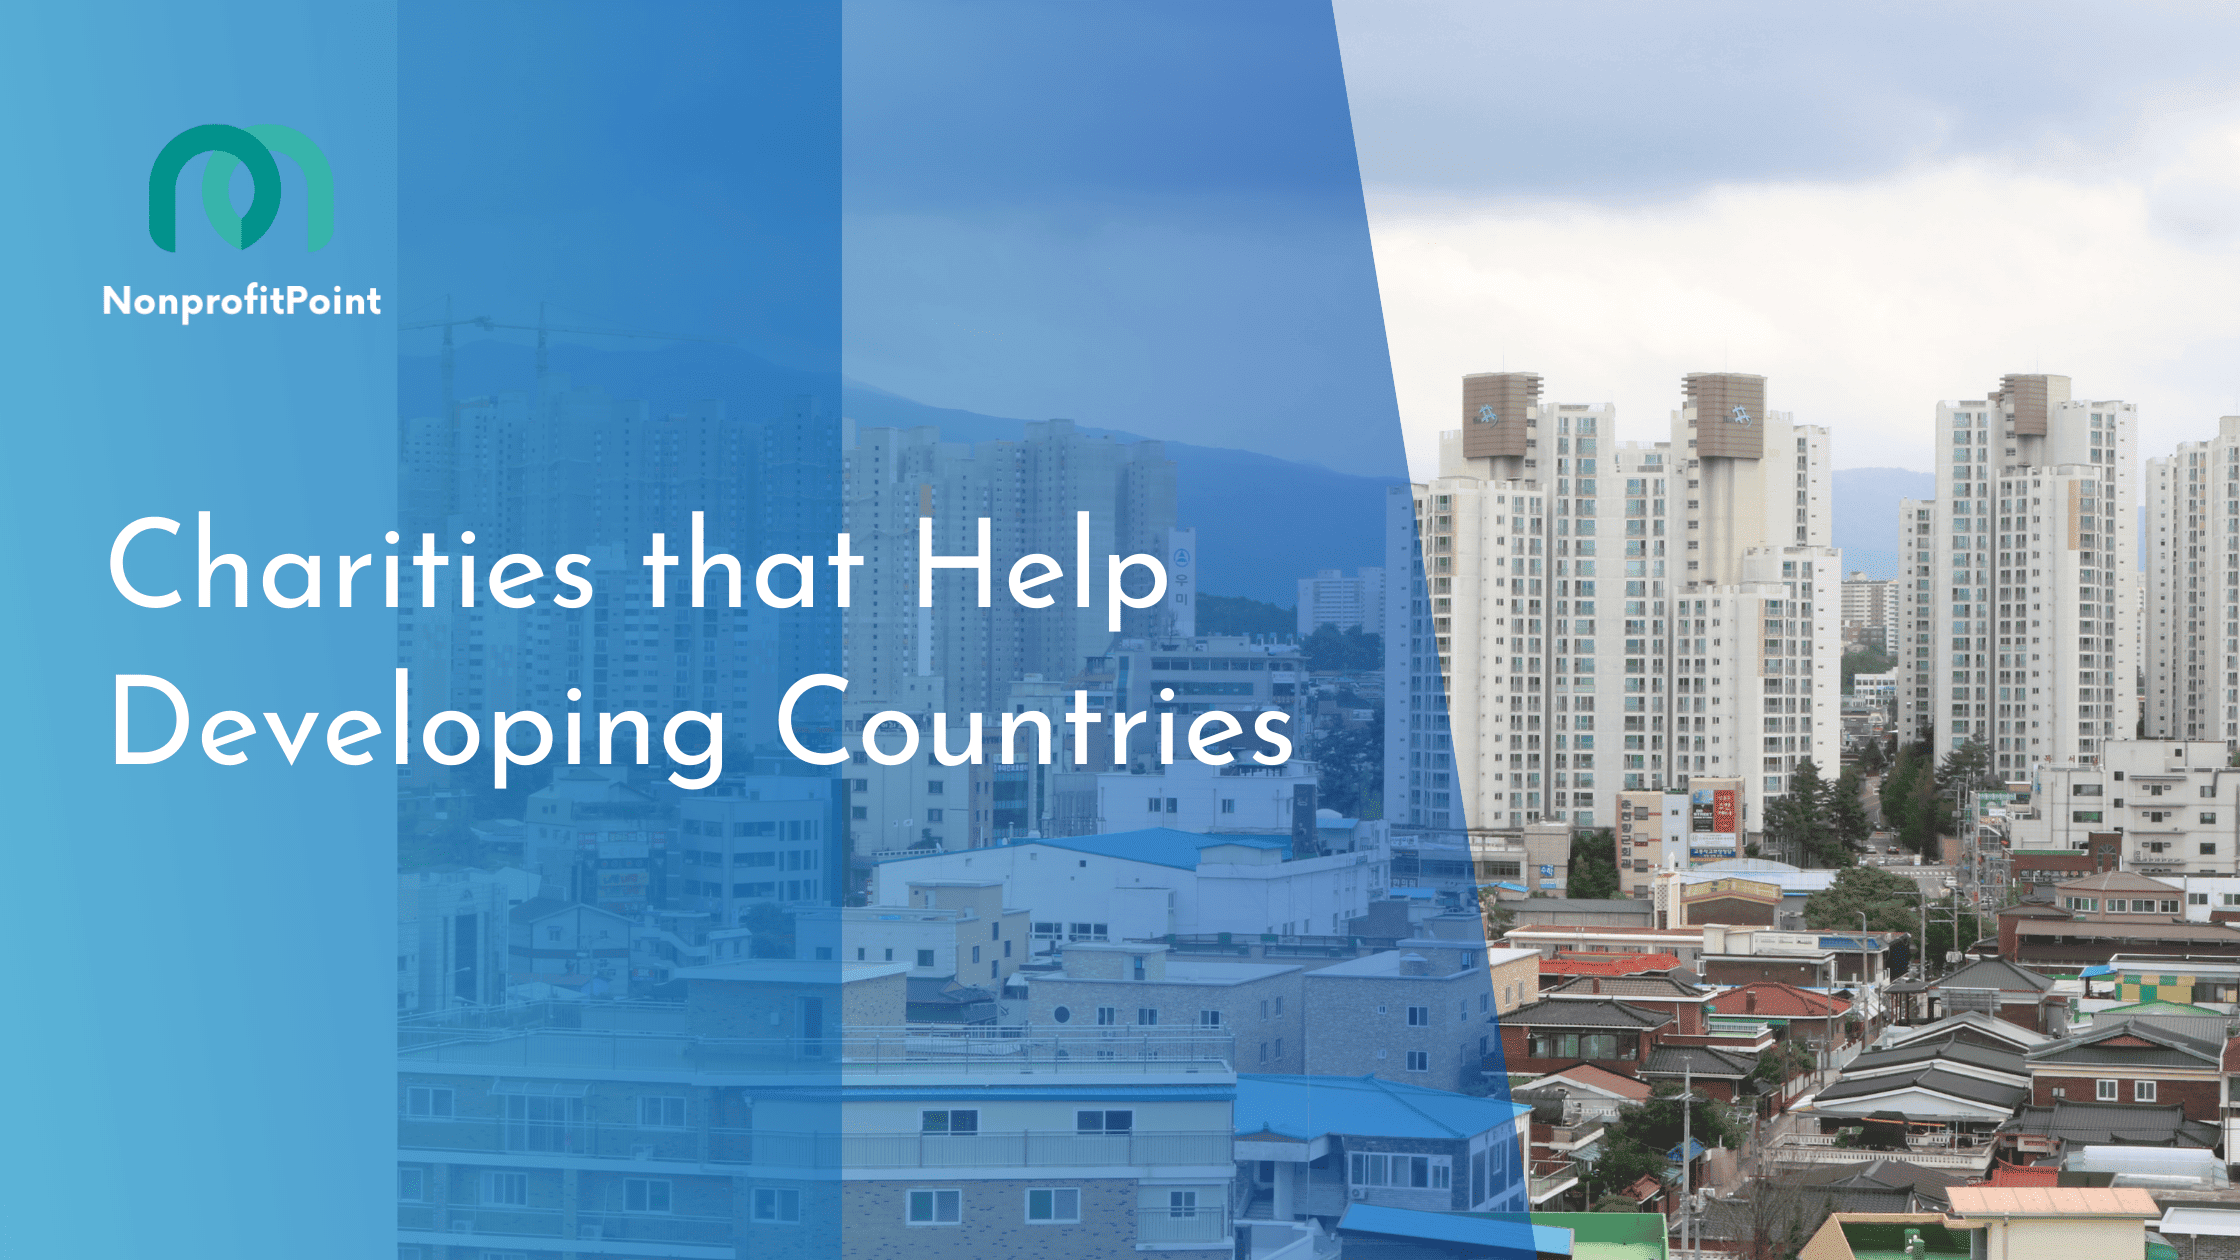 Charities that Help Developing Countries